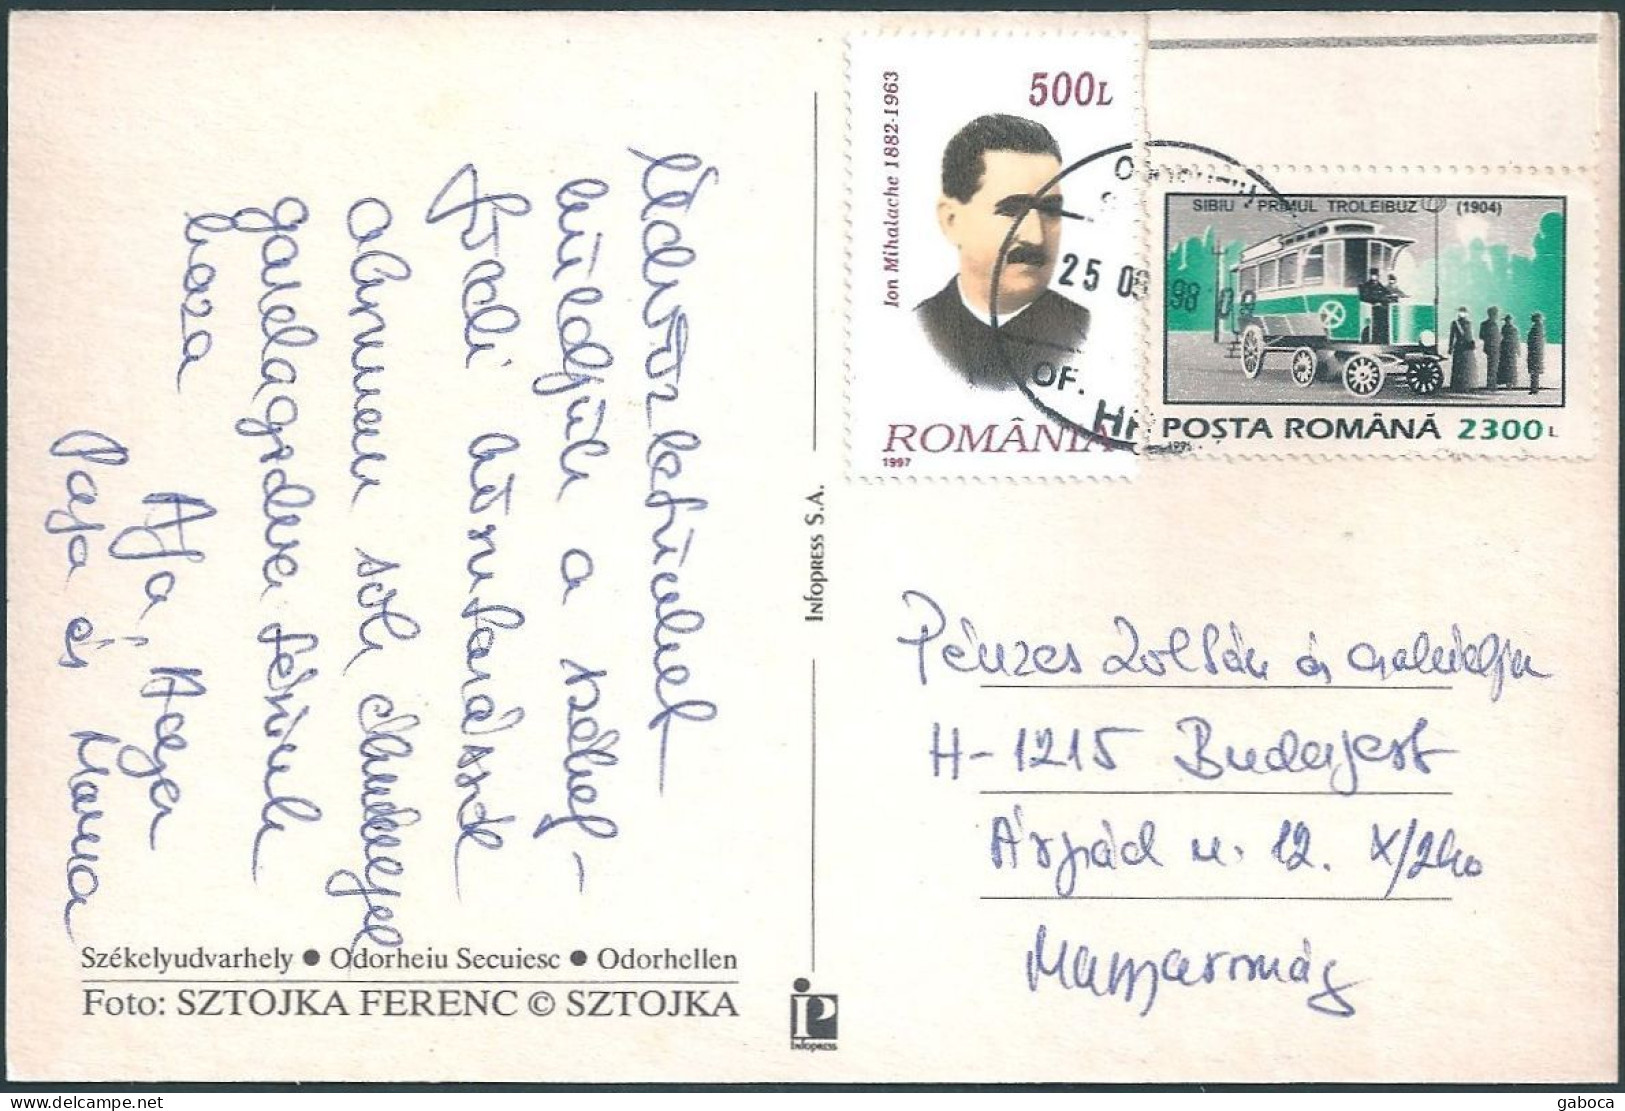 C4621 Romania Transport Trolleybus Personality Politician Mihalache - Busses